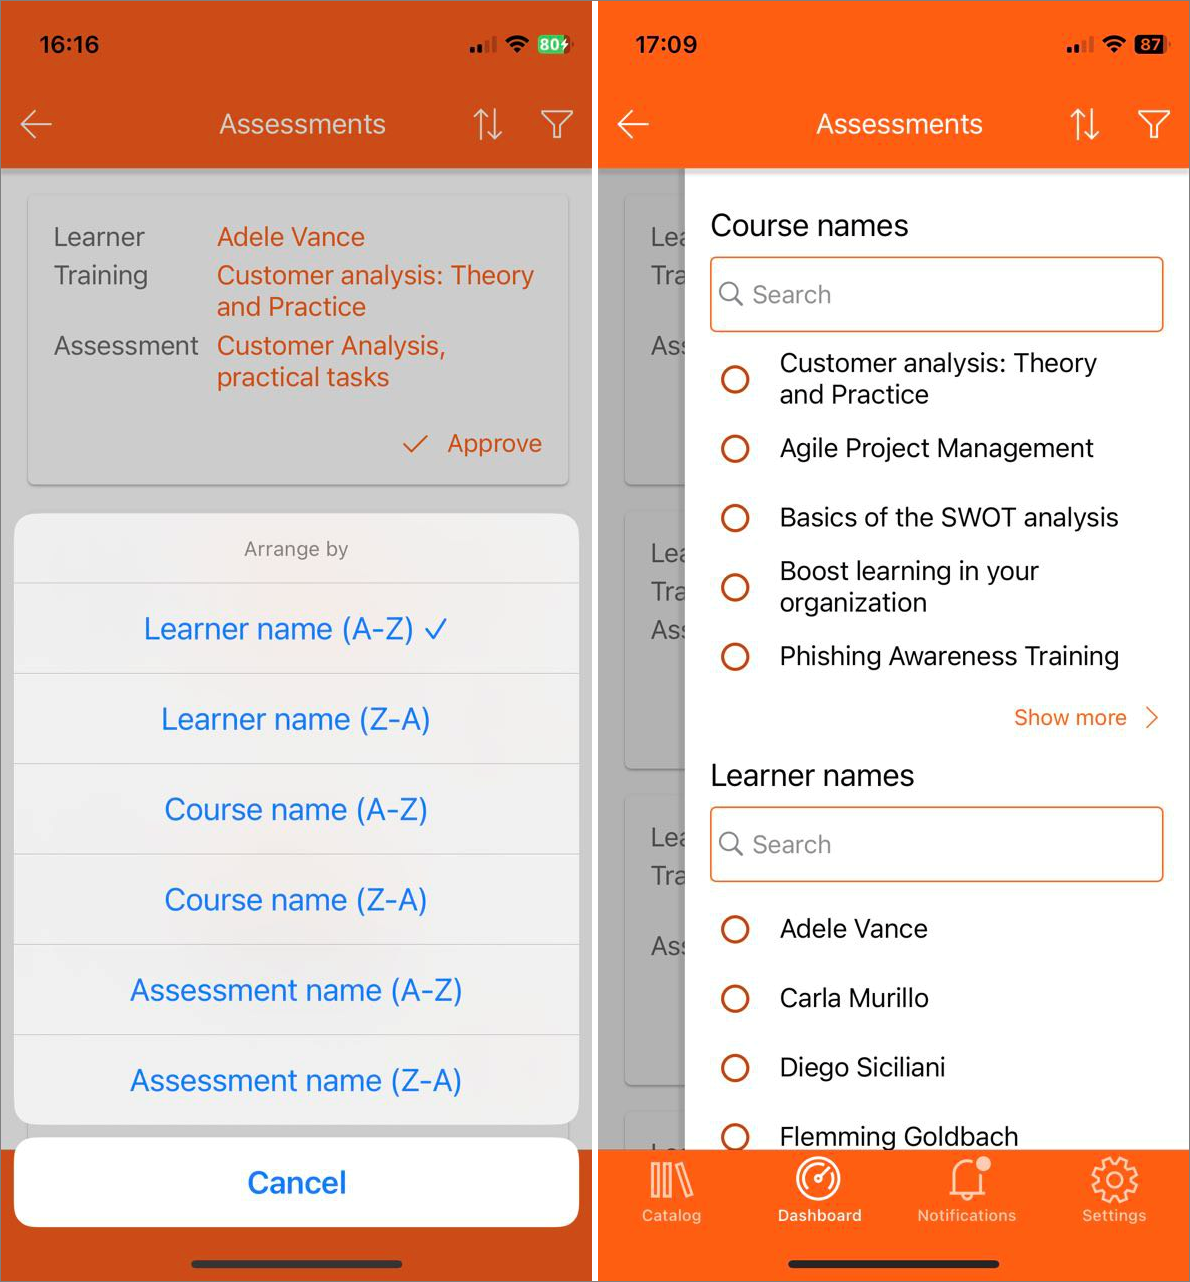 filter_and_sort_on_assessments_in_mobile_app.png